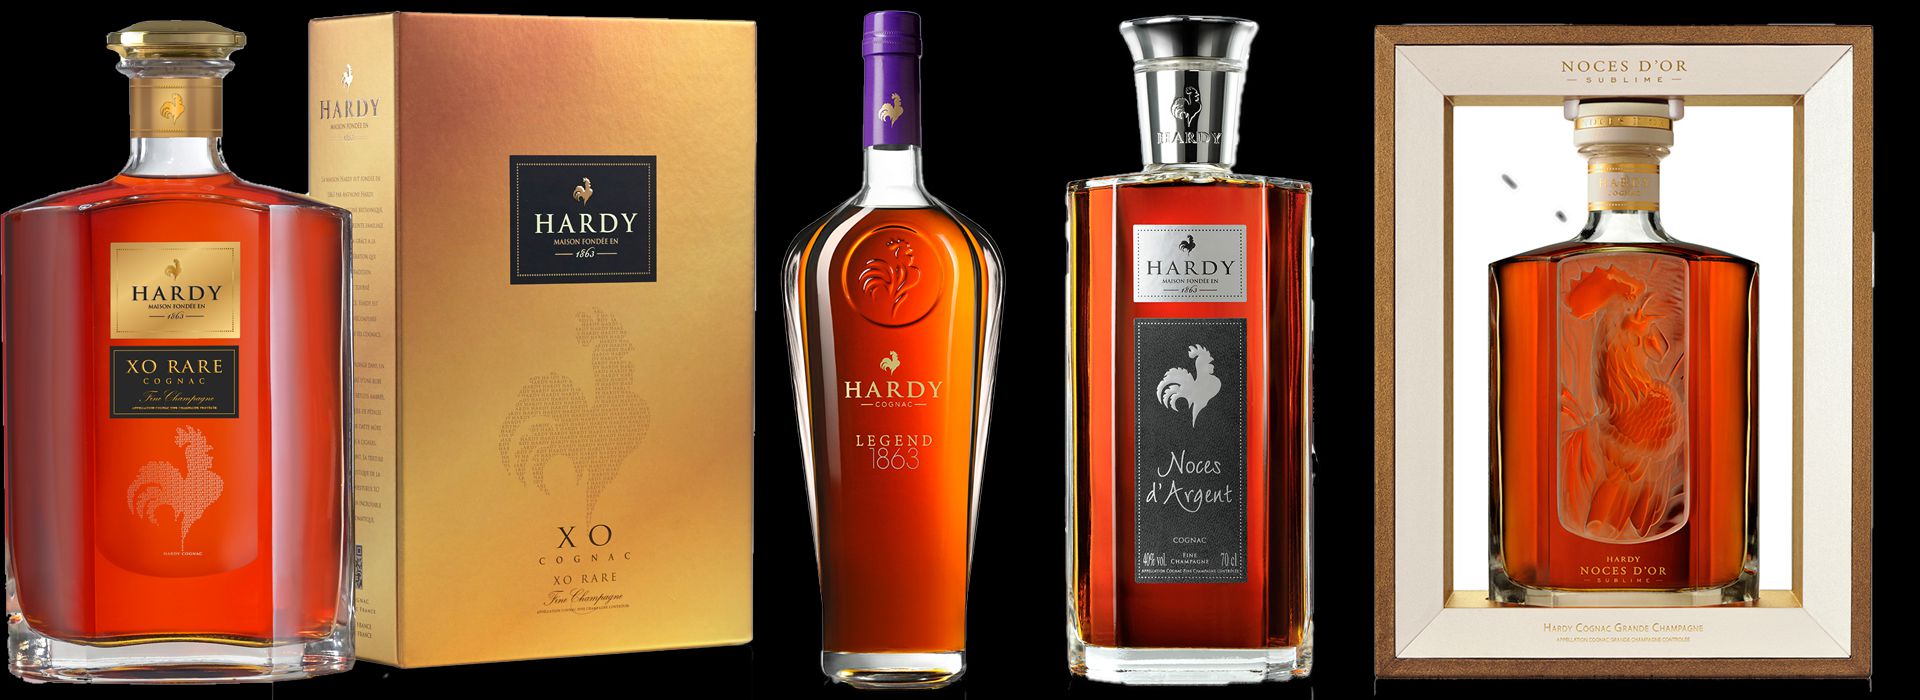 Banner-HARDY-Cognac-background-web.png